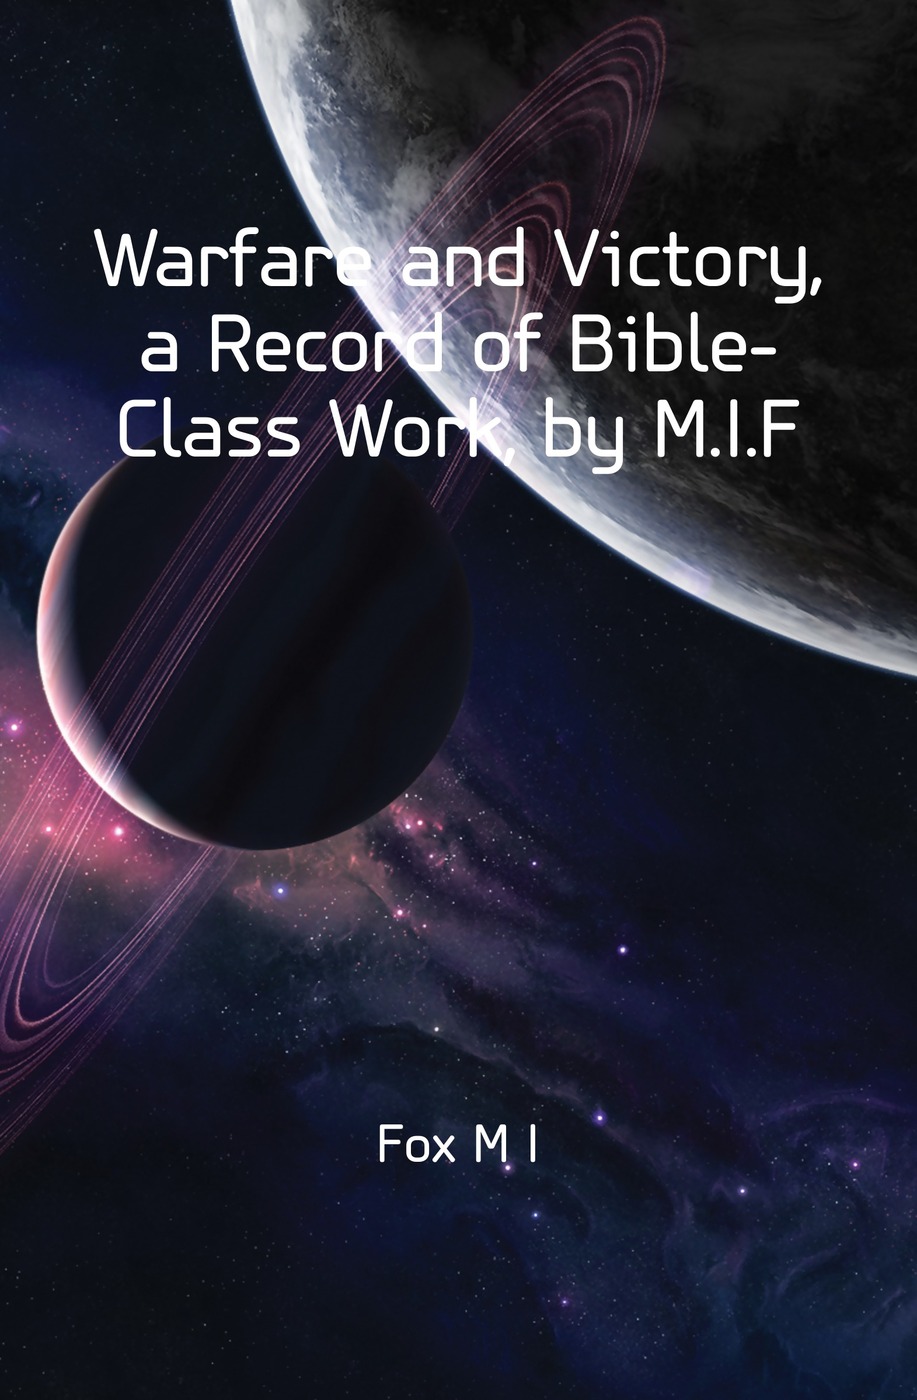 Warfare and Victory, a Record of Bible-Class Work, by M.I.F.